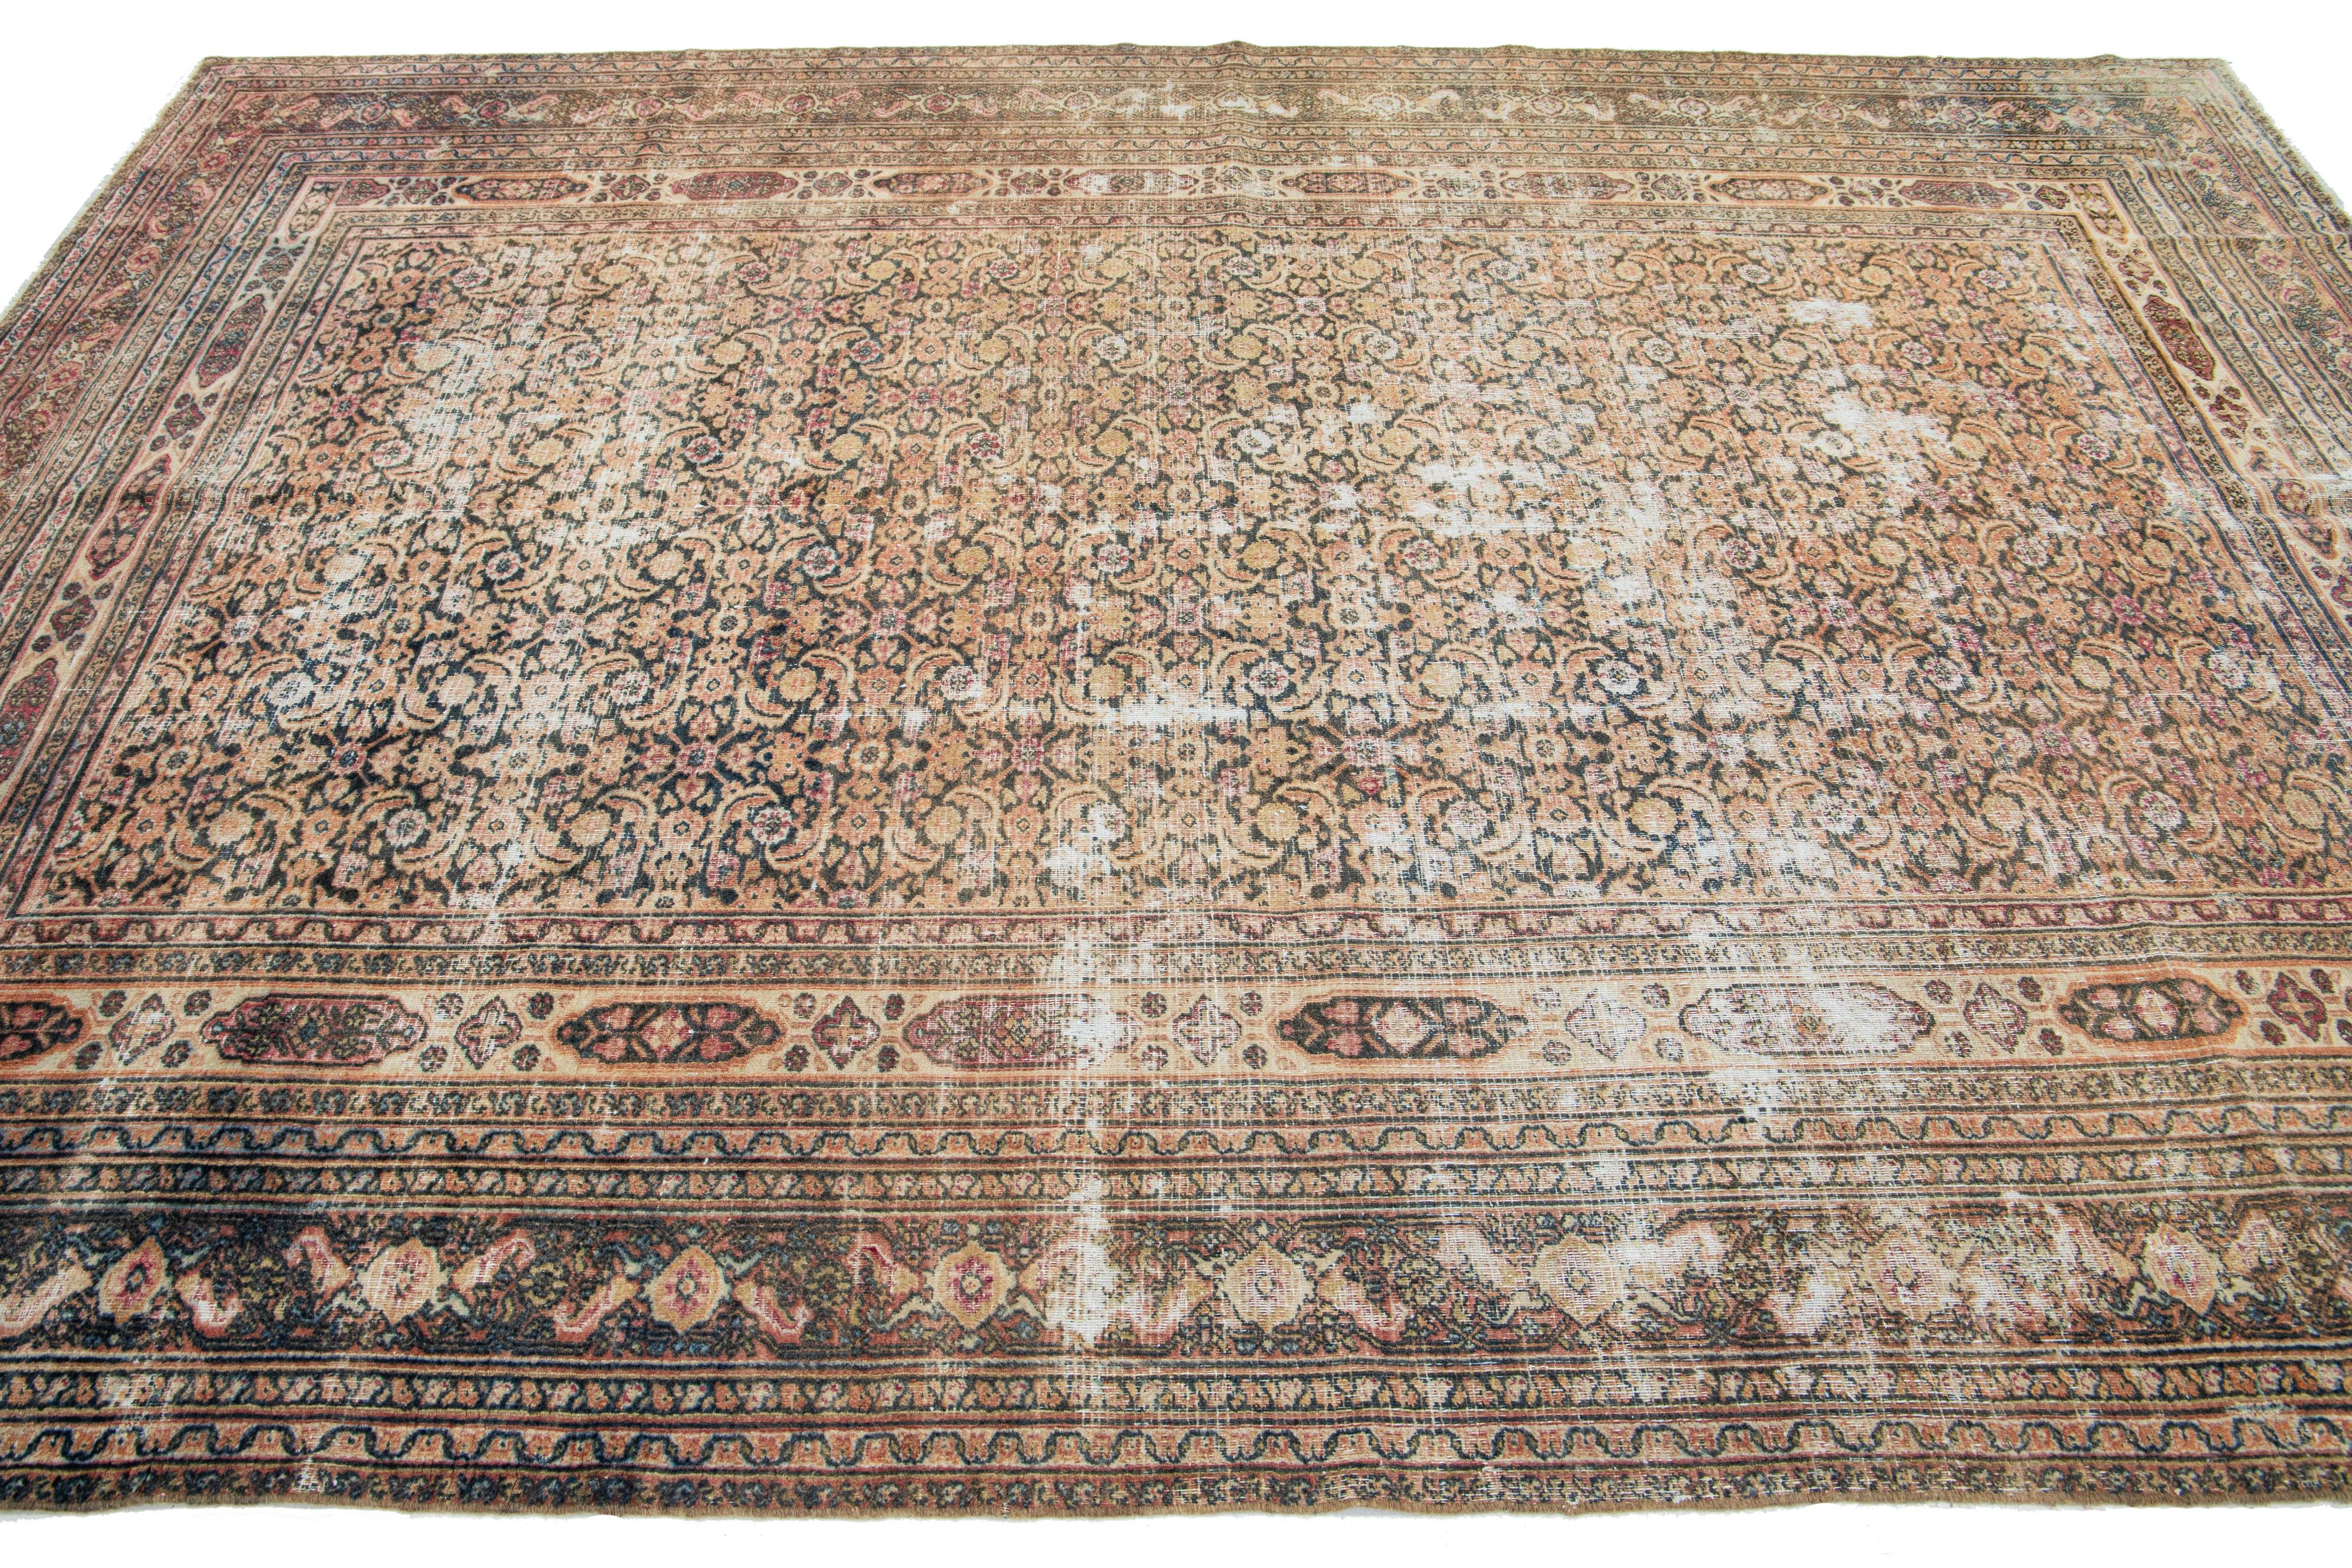  1900s Antique Wool Rug Persian Tabriz In Rust With Floral Pattern  In Distressed Condition For Sale In Norwalk, CT